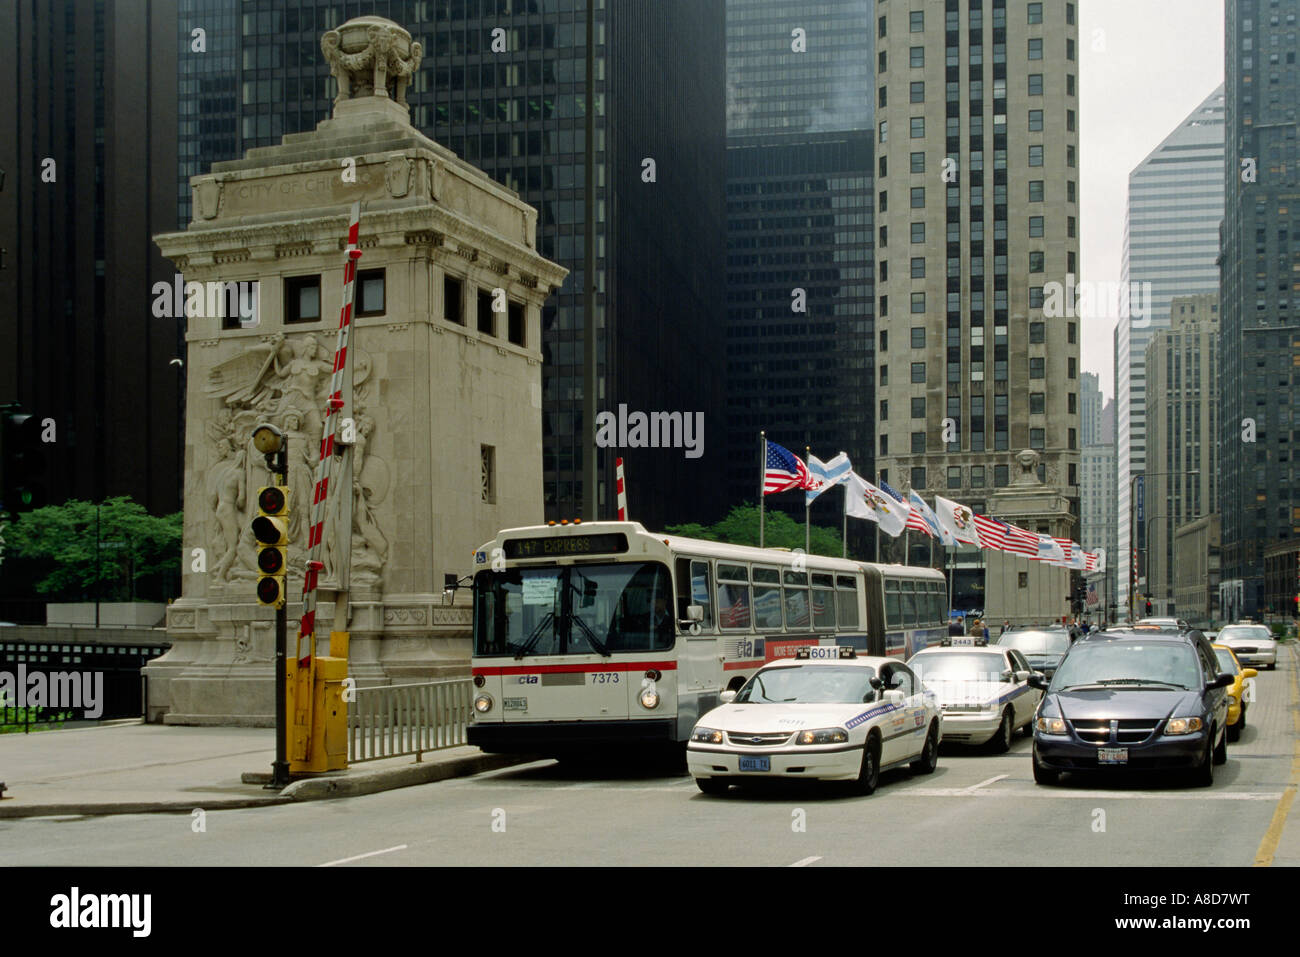 A CITY BUS TAXIS and other vehicles cross the MICHIGAN STREET BRIDGE CHICAGO ILLINOIS Stock Photo